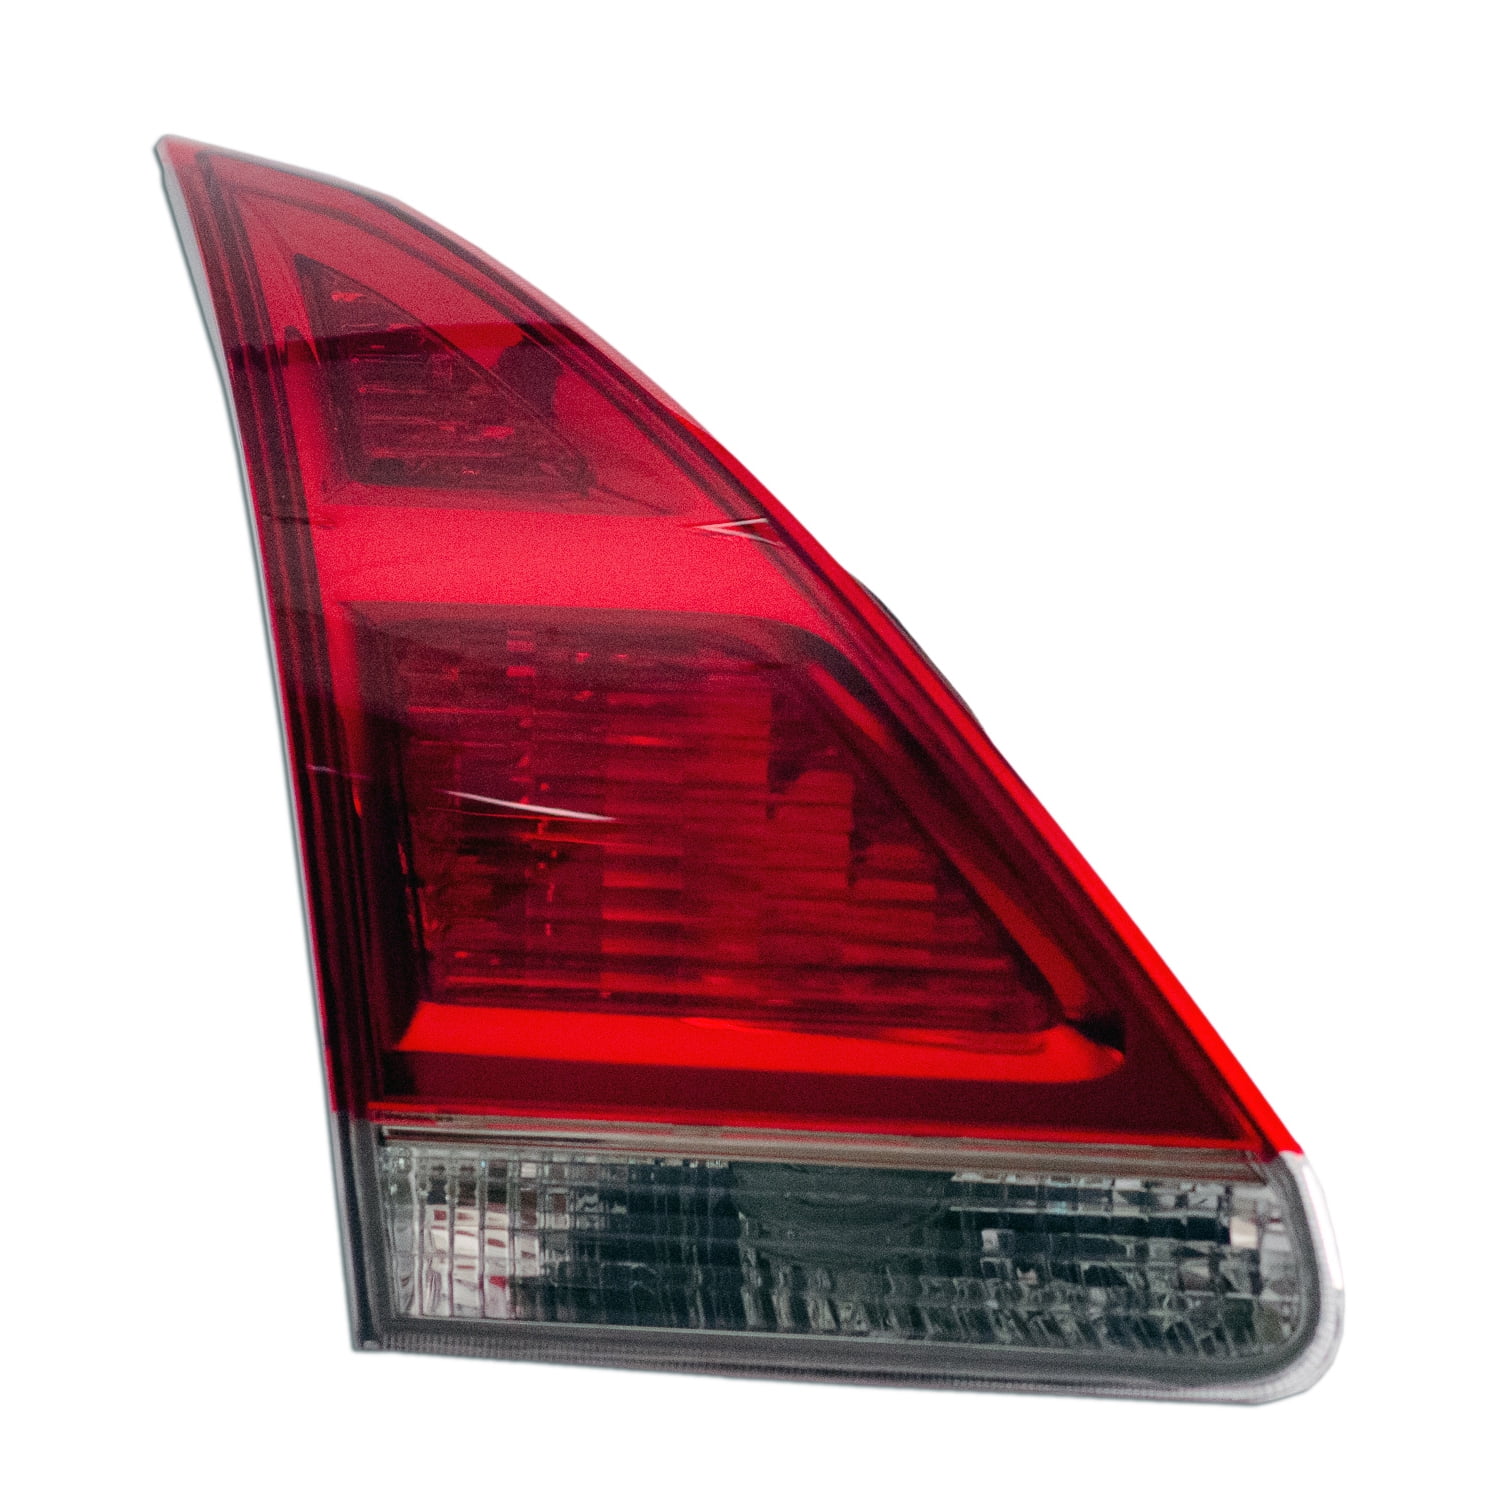 NEW TAIL LIGHT PAIR FIT TOYOTA VENZA 2011 2012 815500T010 81560-0T010 815600T010 